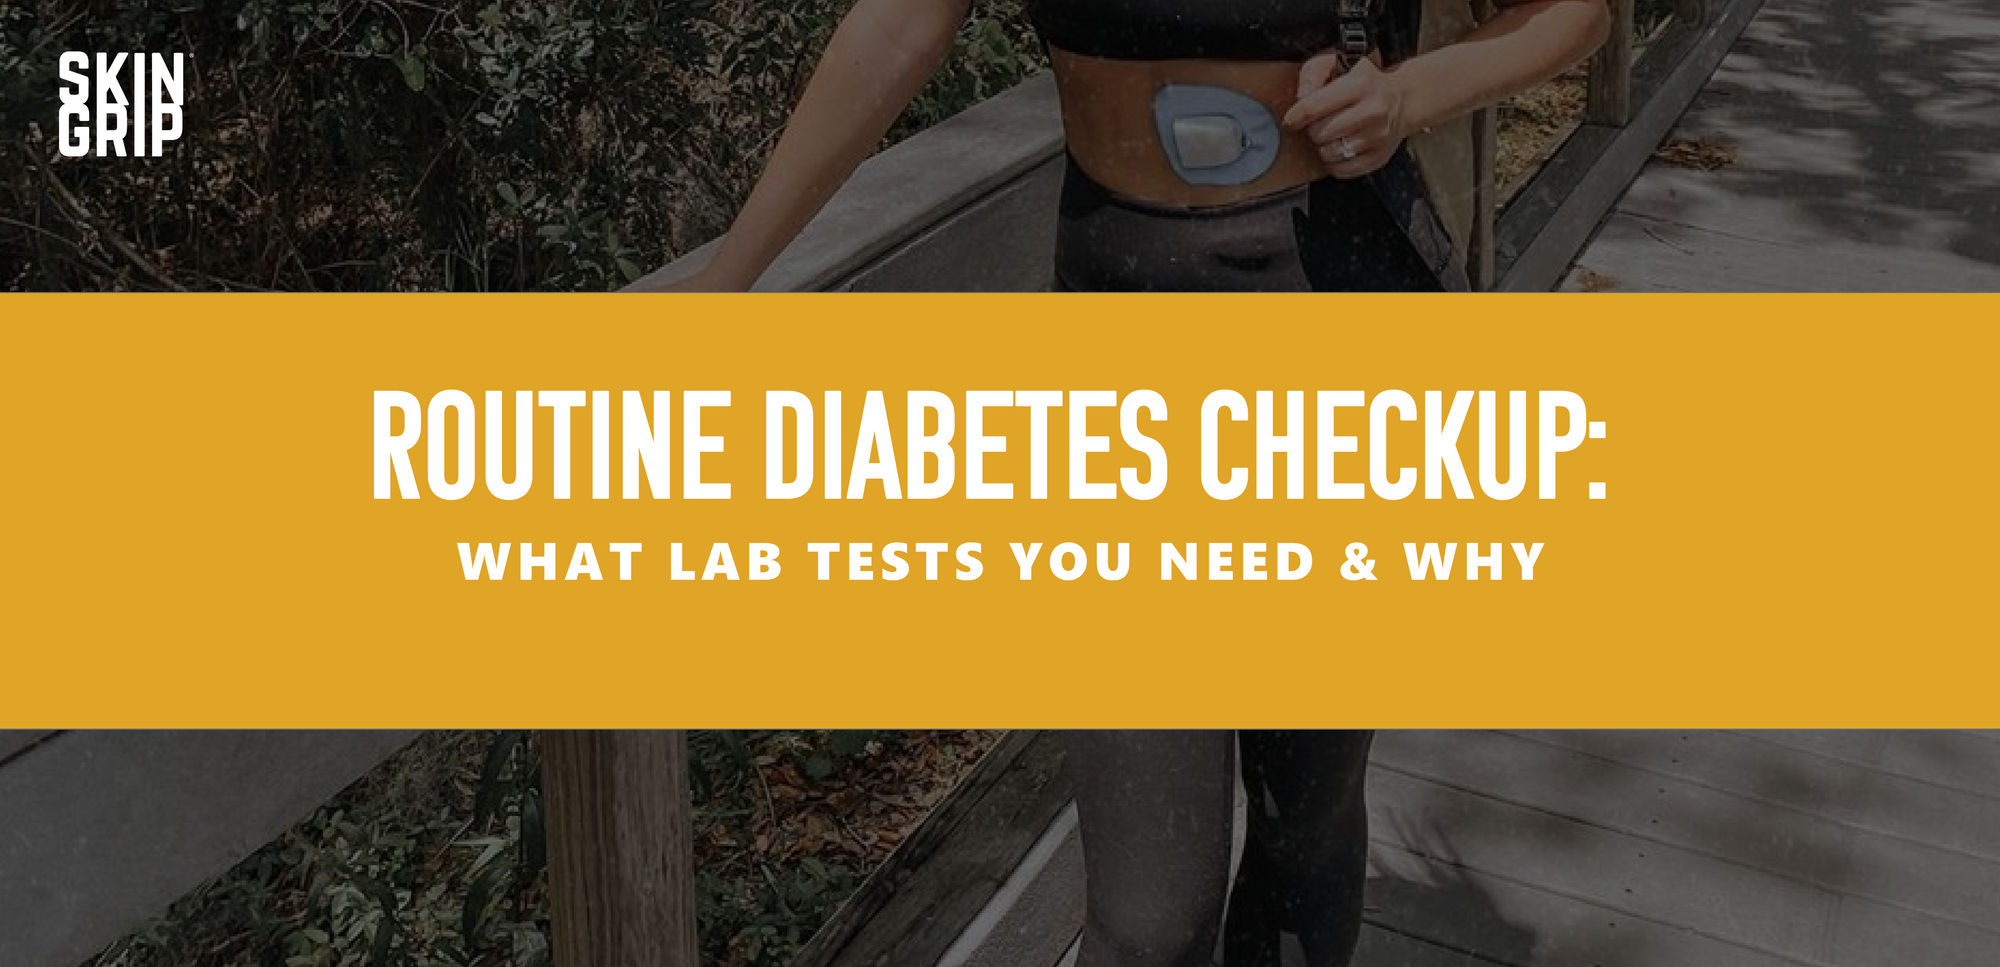 Routine Diabetes Checkup: What Lab Tests You Need & Why